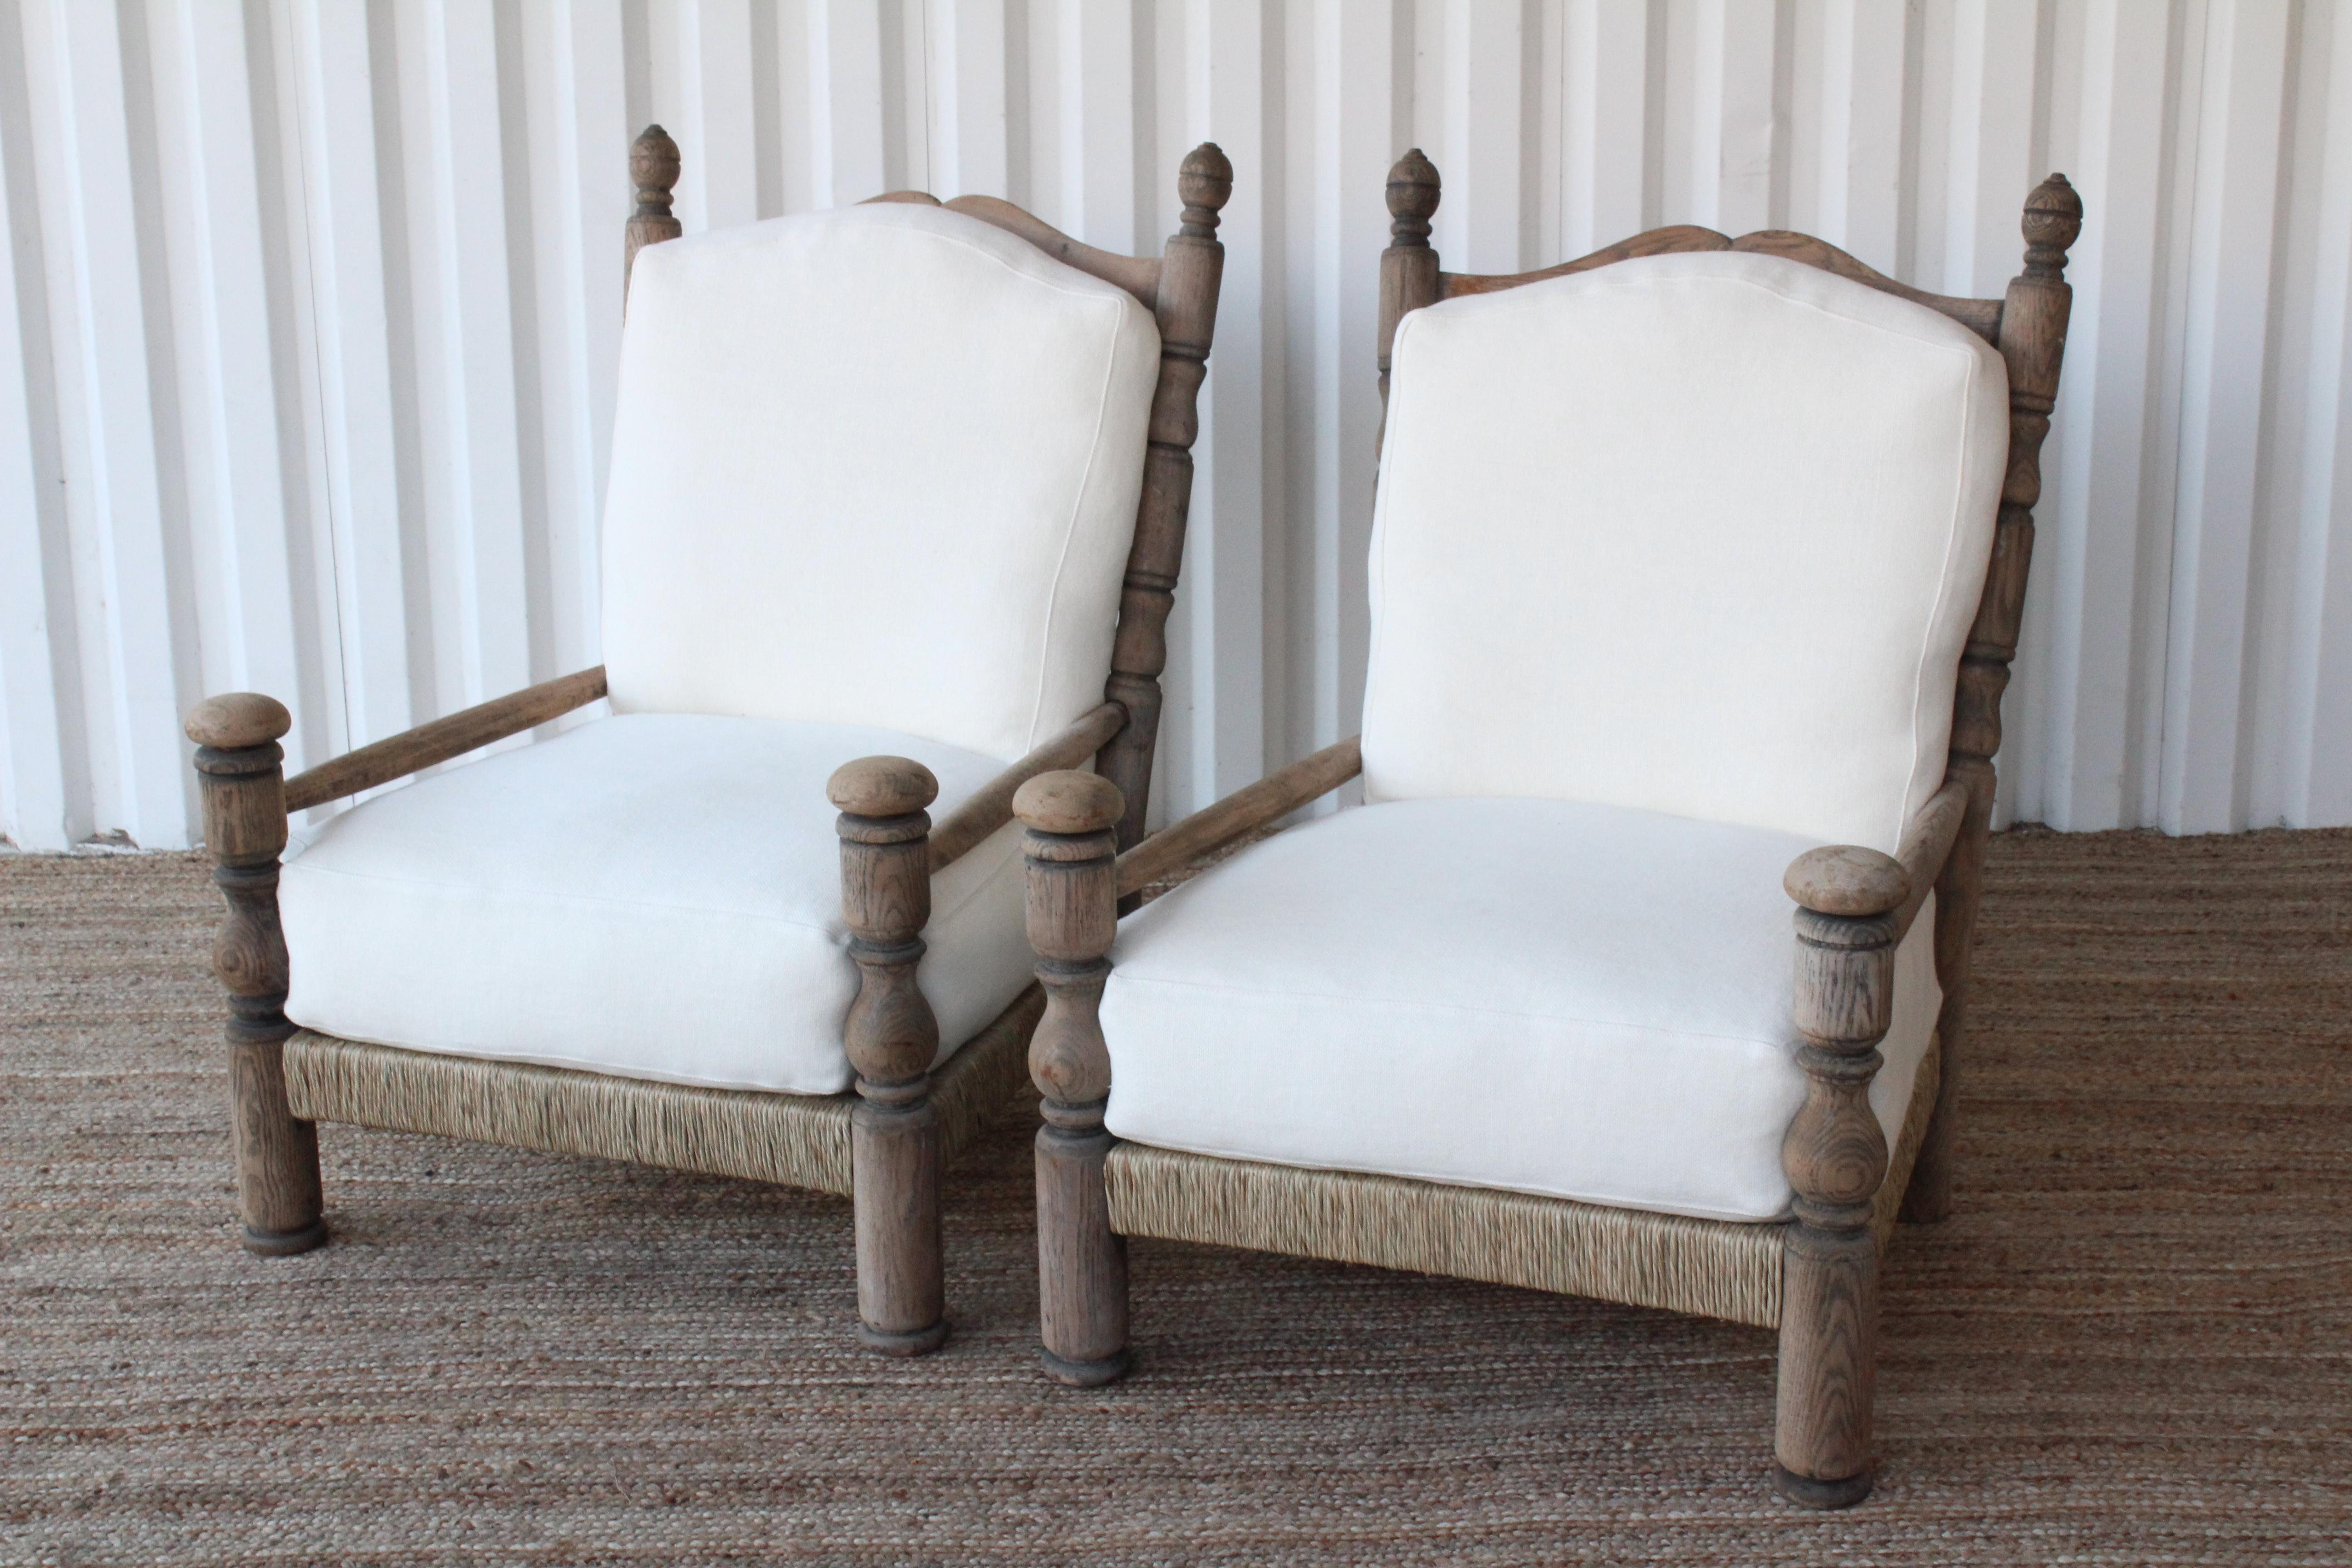 Pair of vintage oak and rush lounge chairs, France, 1950s. Made of solid oak with newly woven rush seats. New upholstered cushions in a white Belgian linen fabric. Cushions inserts are foam and down filled. Oak finish shows wear and patina. The